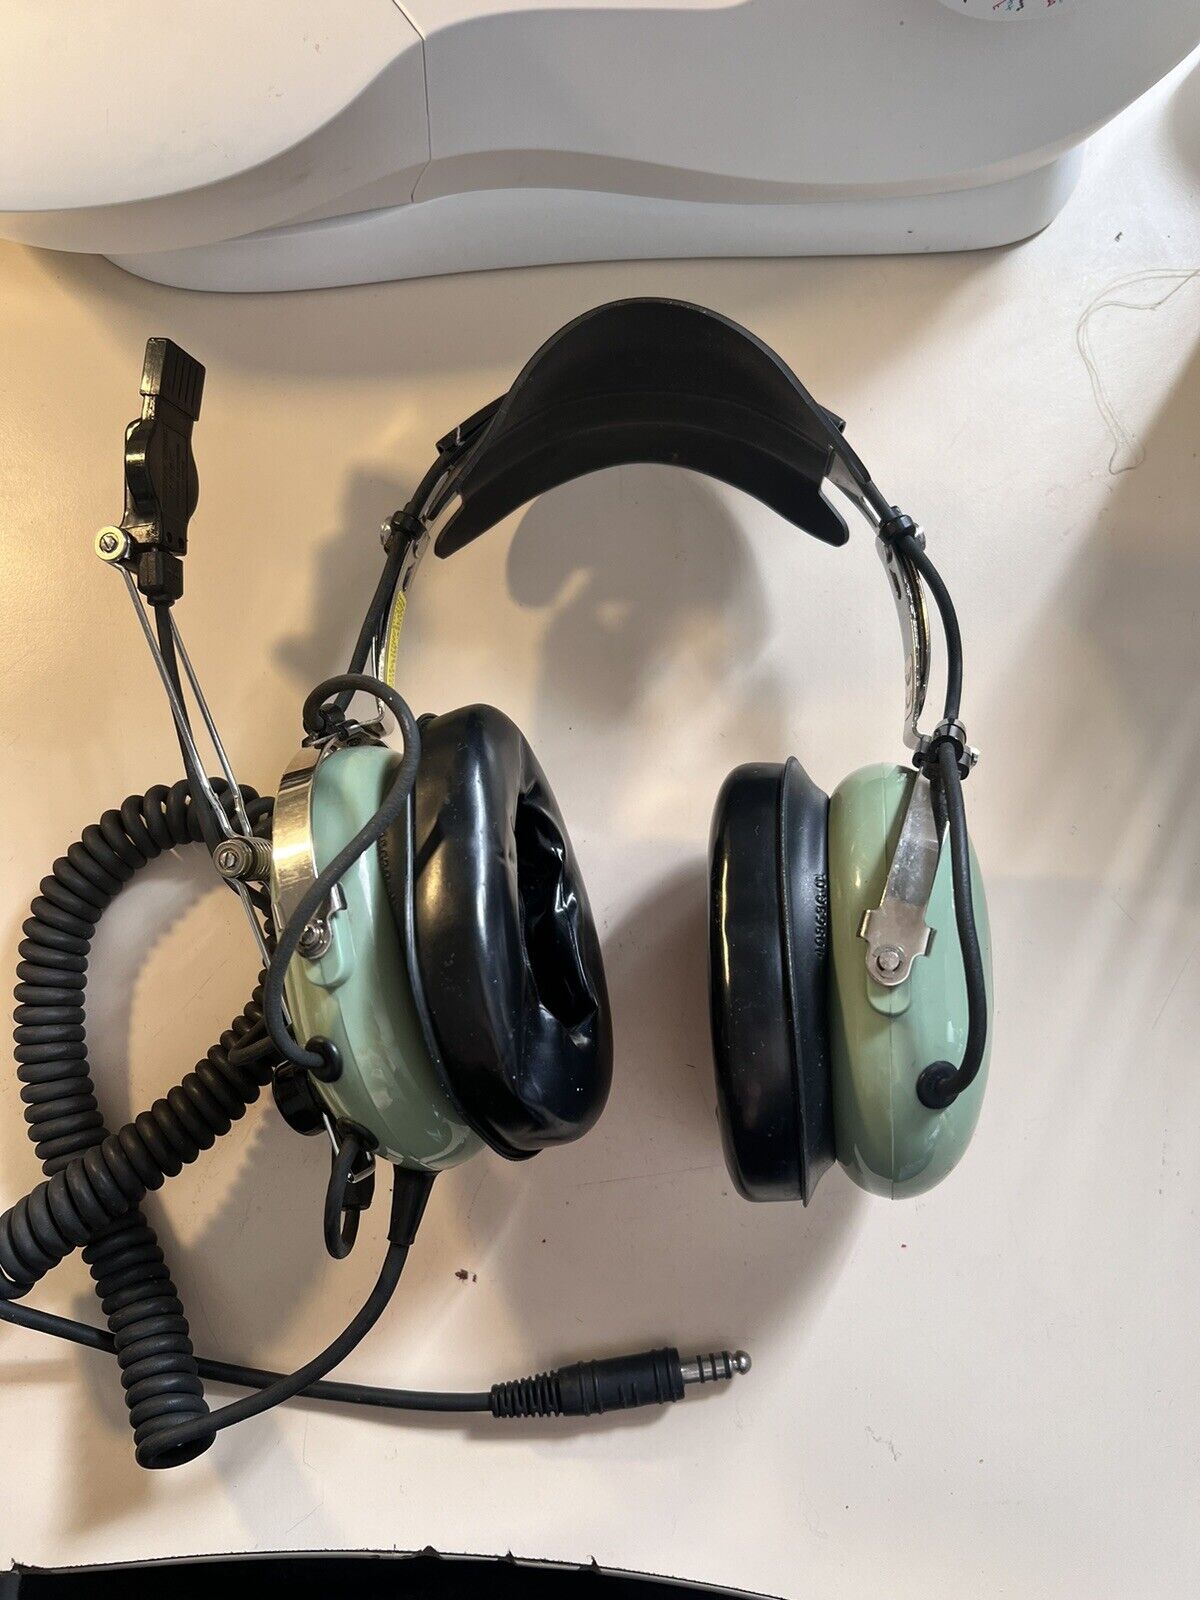 david clark aviation headset h10-76  within The US